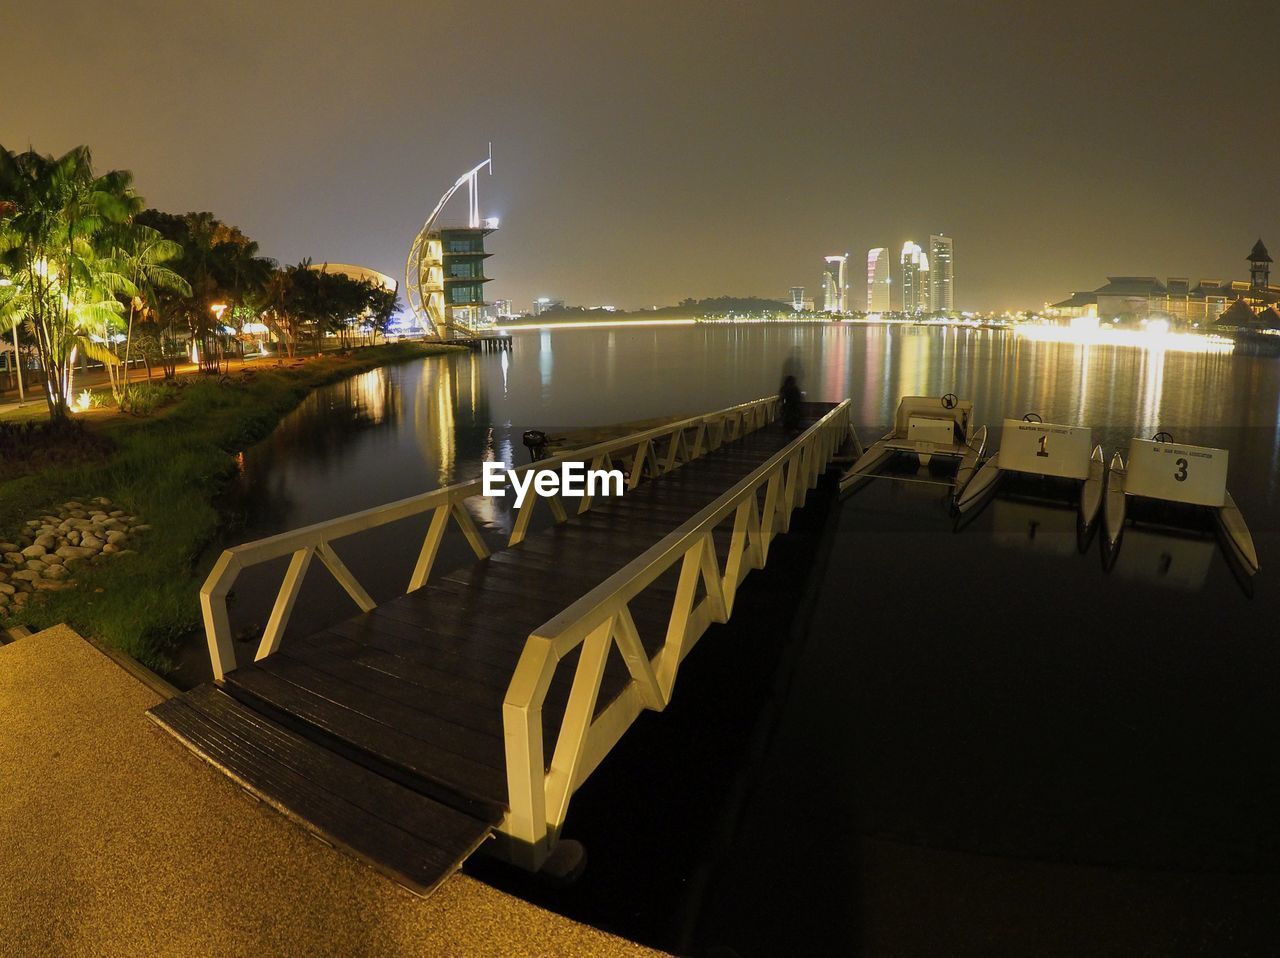 Pier by calm lake in illuminated city against clear sky at night